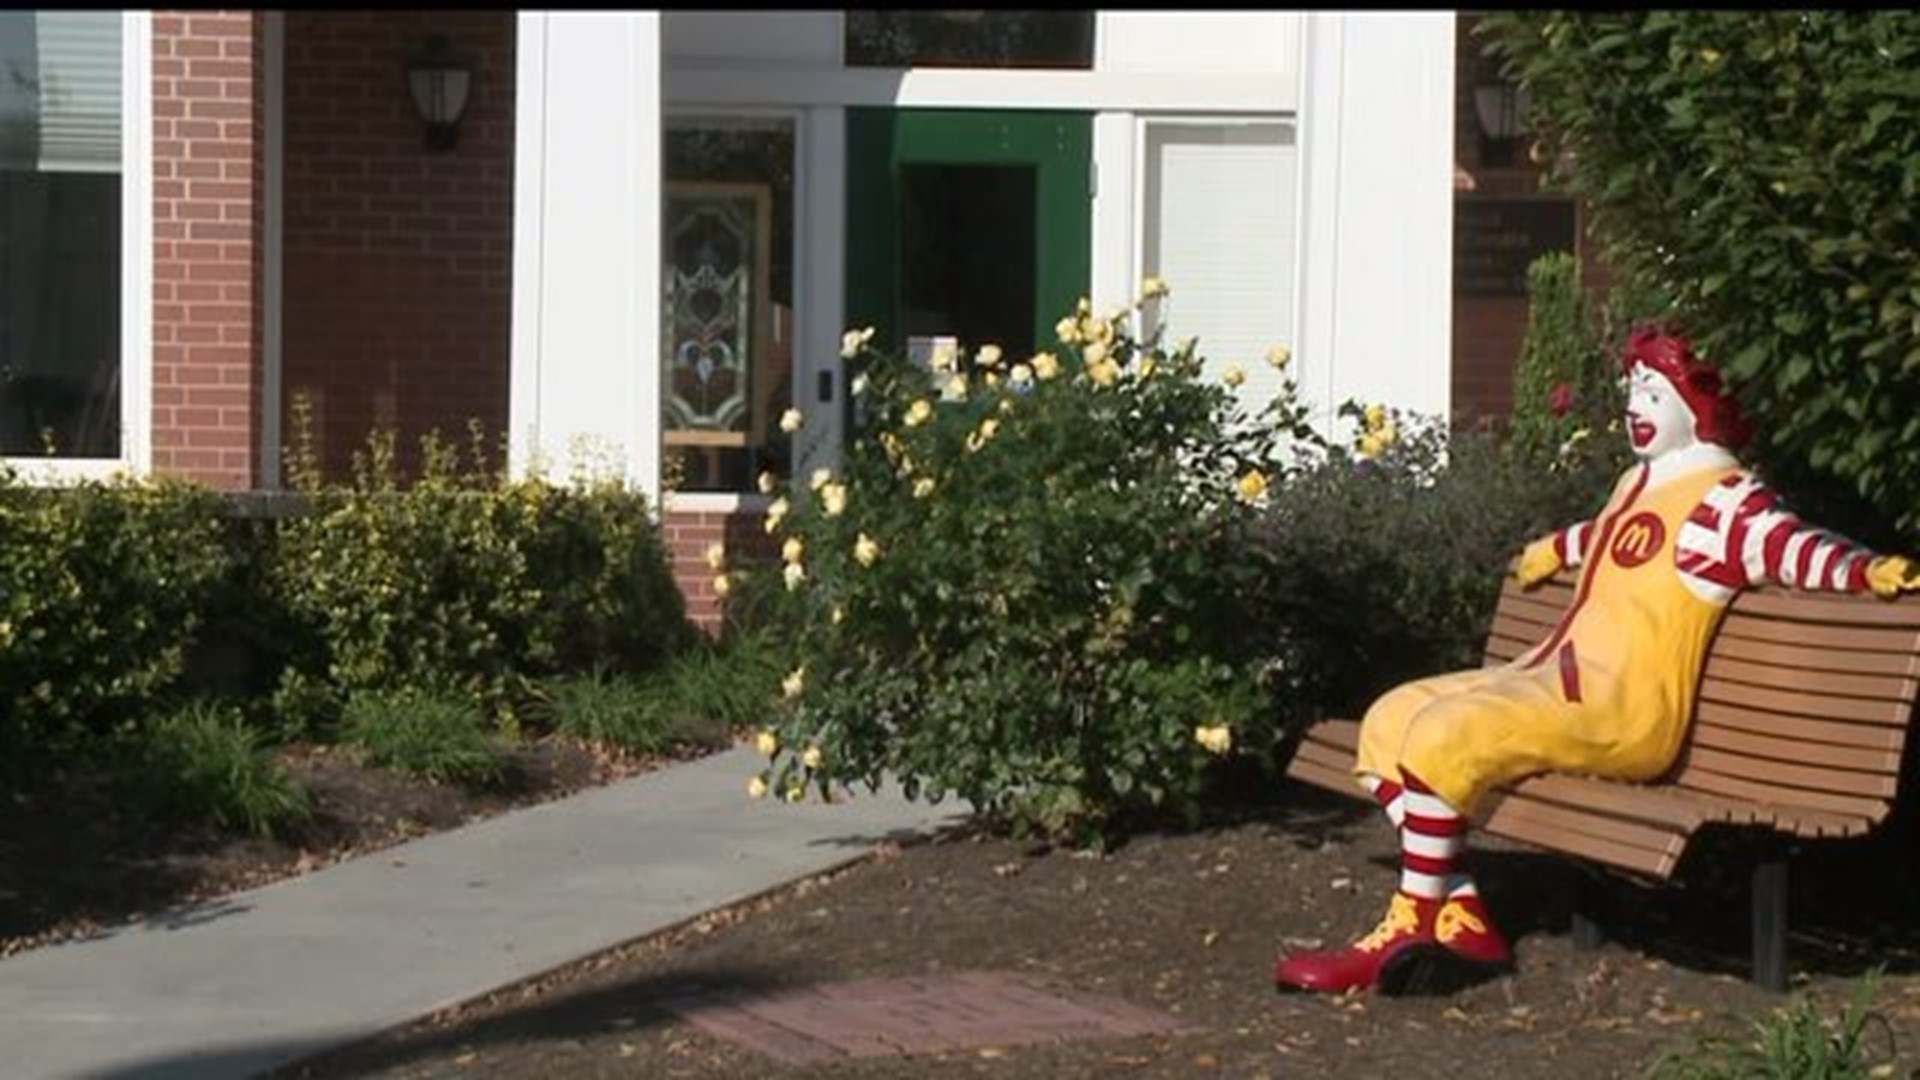 Ronald McDonald House Charities of Central PA: More than just a place to stay